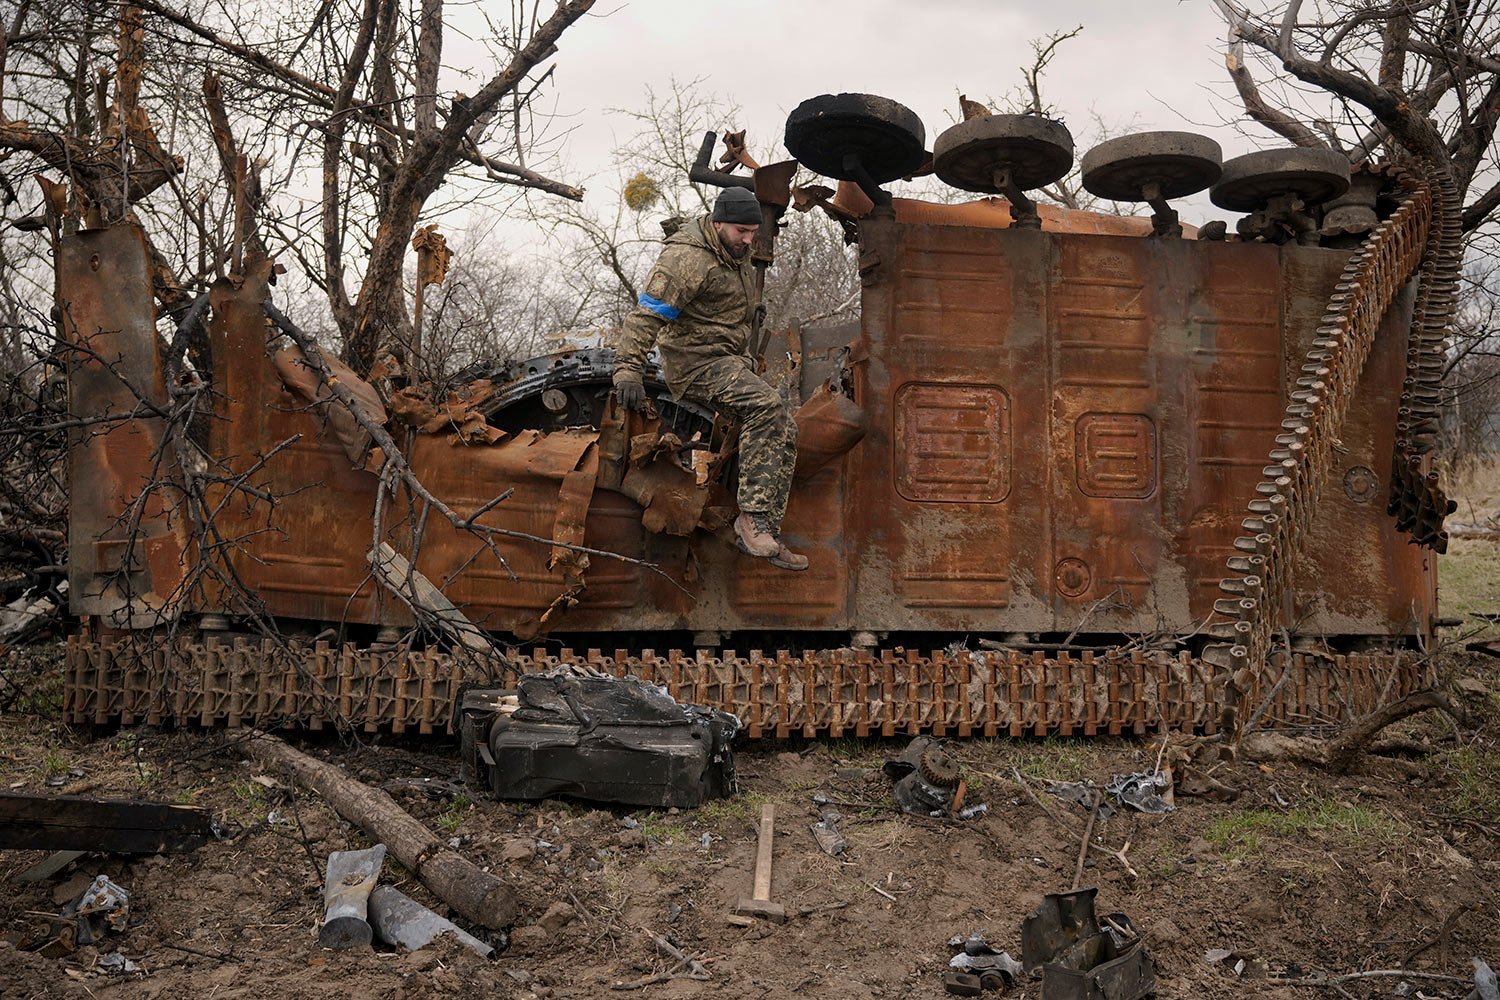  A Ukrainian serviceman jumps from a destroyed Russian fighting vehicle after collecting parts and ammunition in the village of Andriivka, Ukraine, heavily affected by fighting between Russian and Ukrainian forces, Wednesday, April 6, 2022. (AP Photo